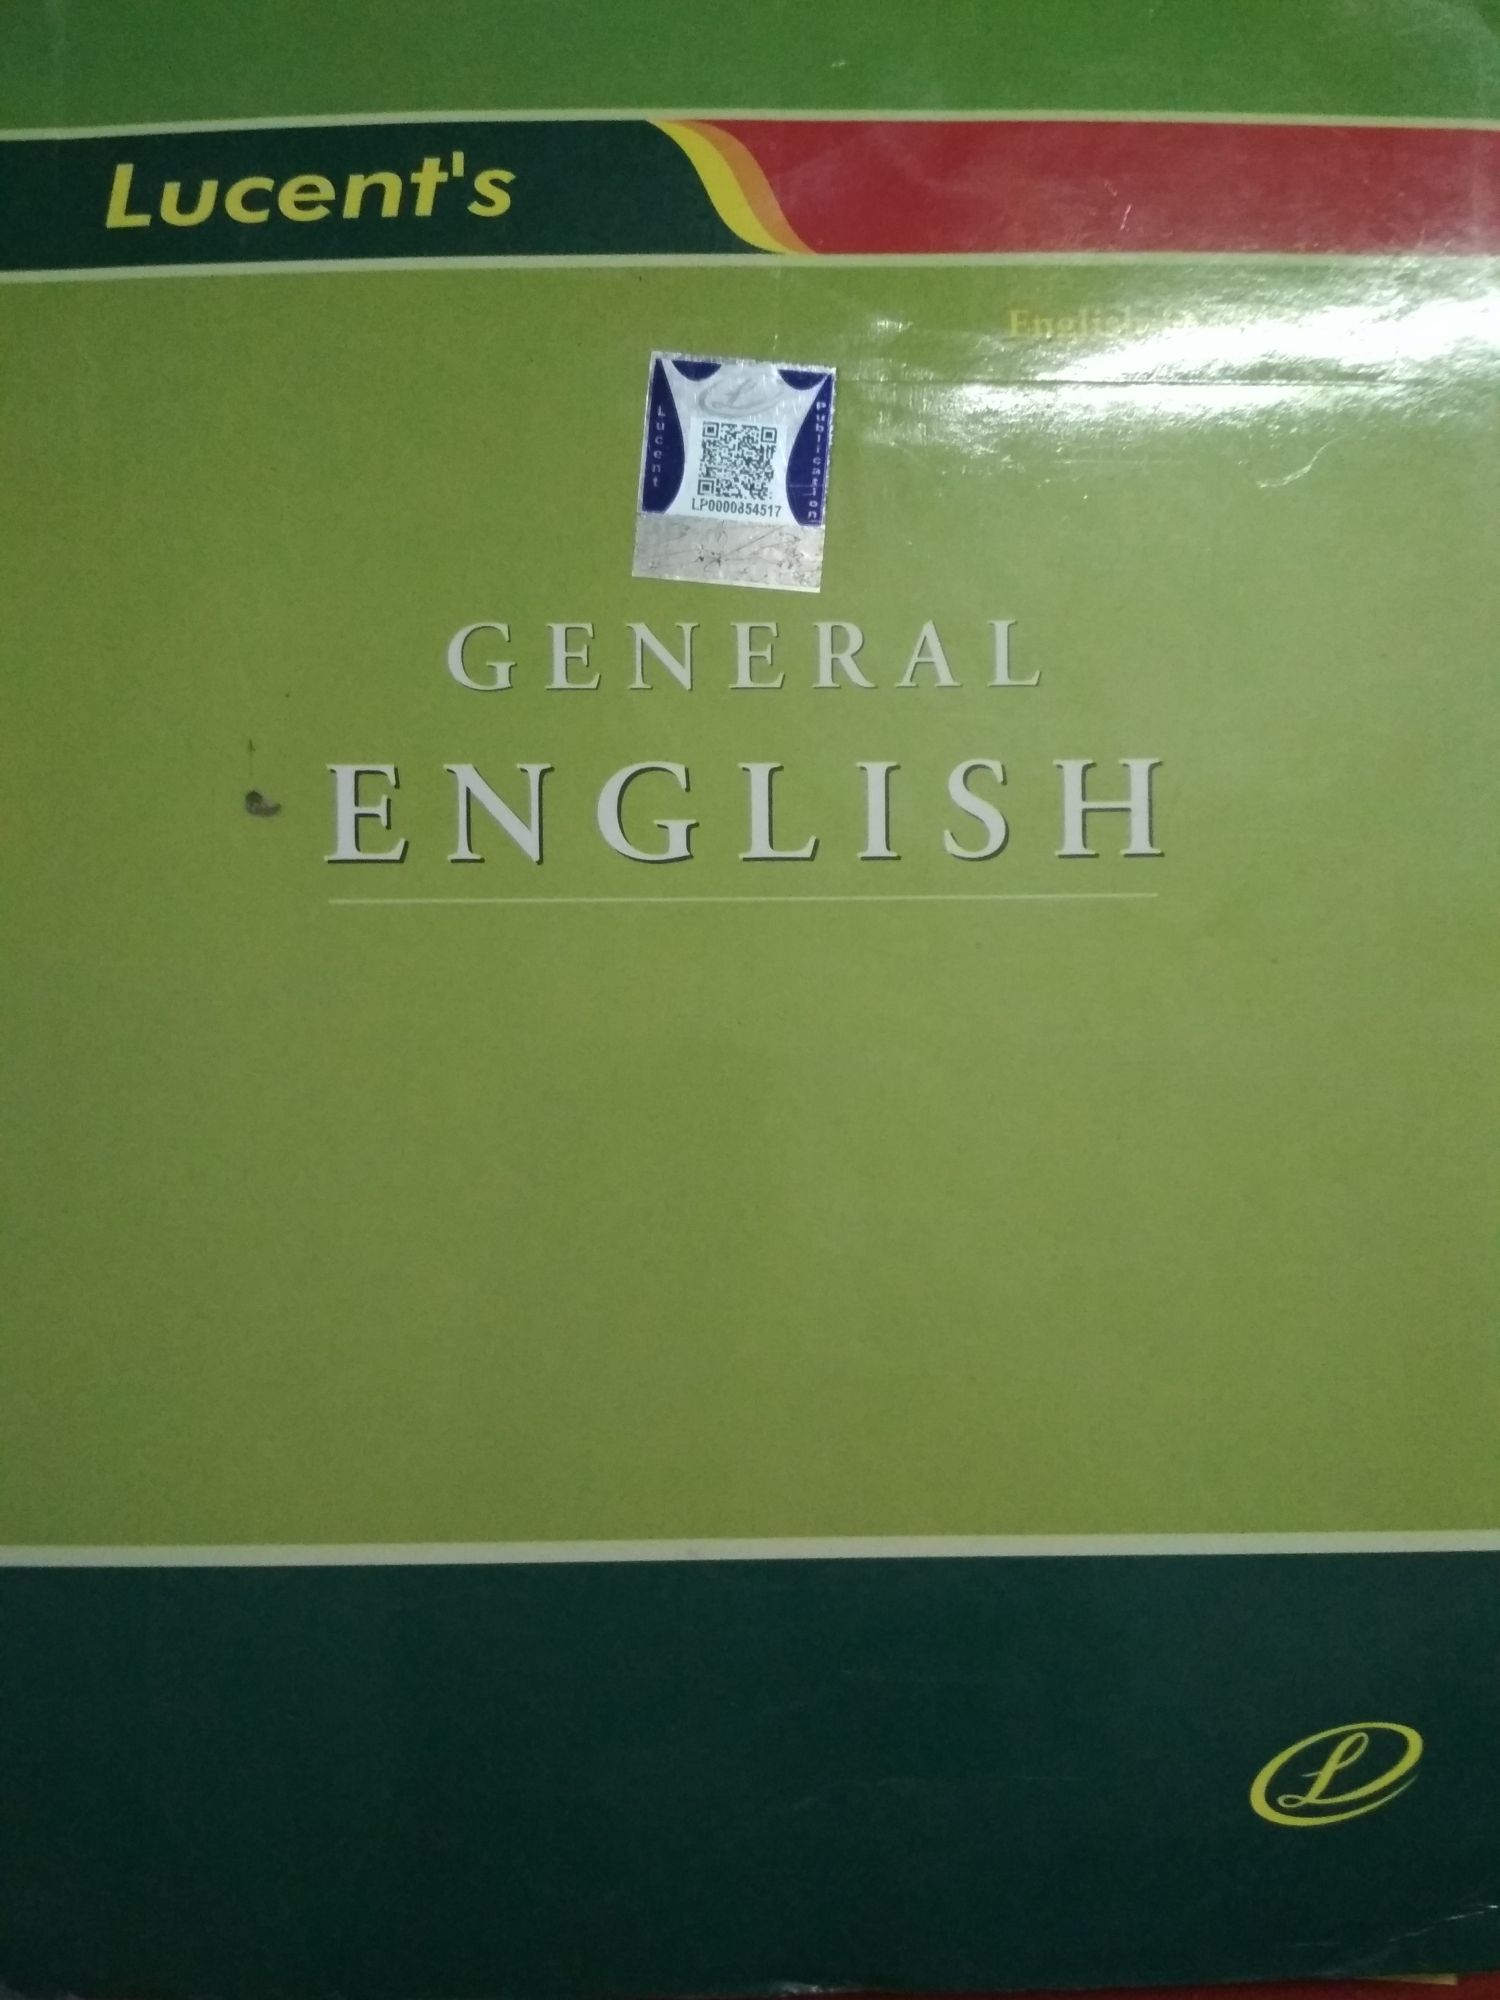 Lucent General English In Hindi